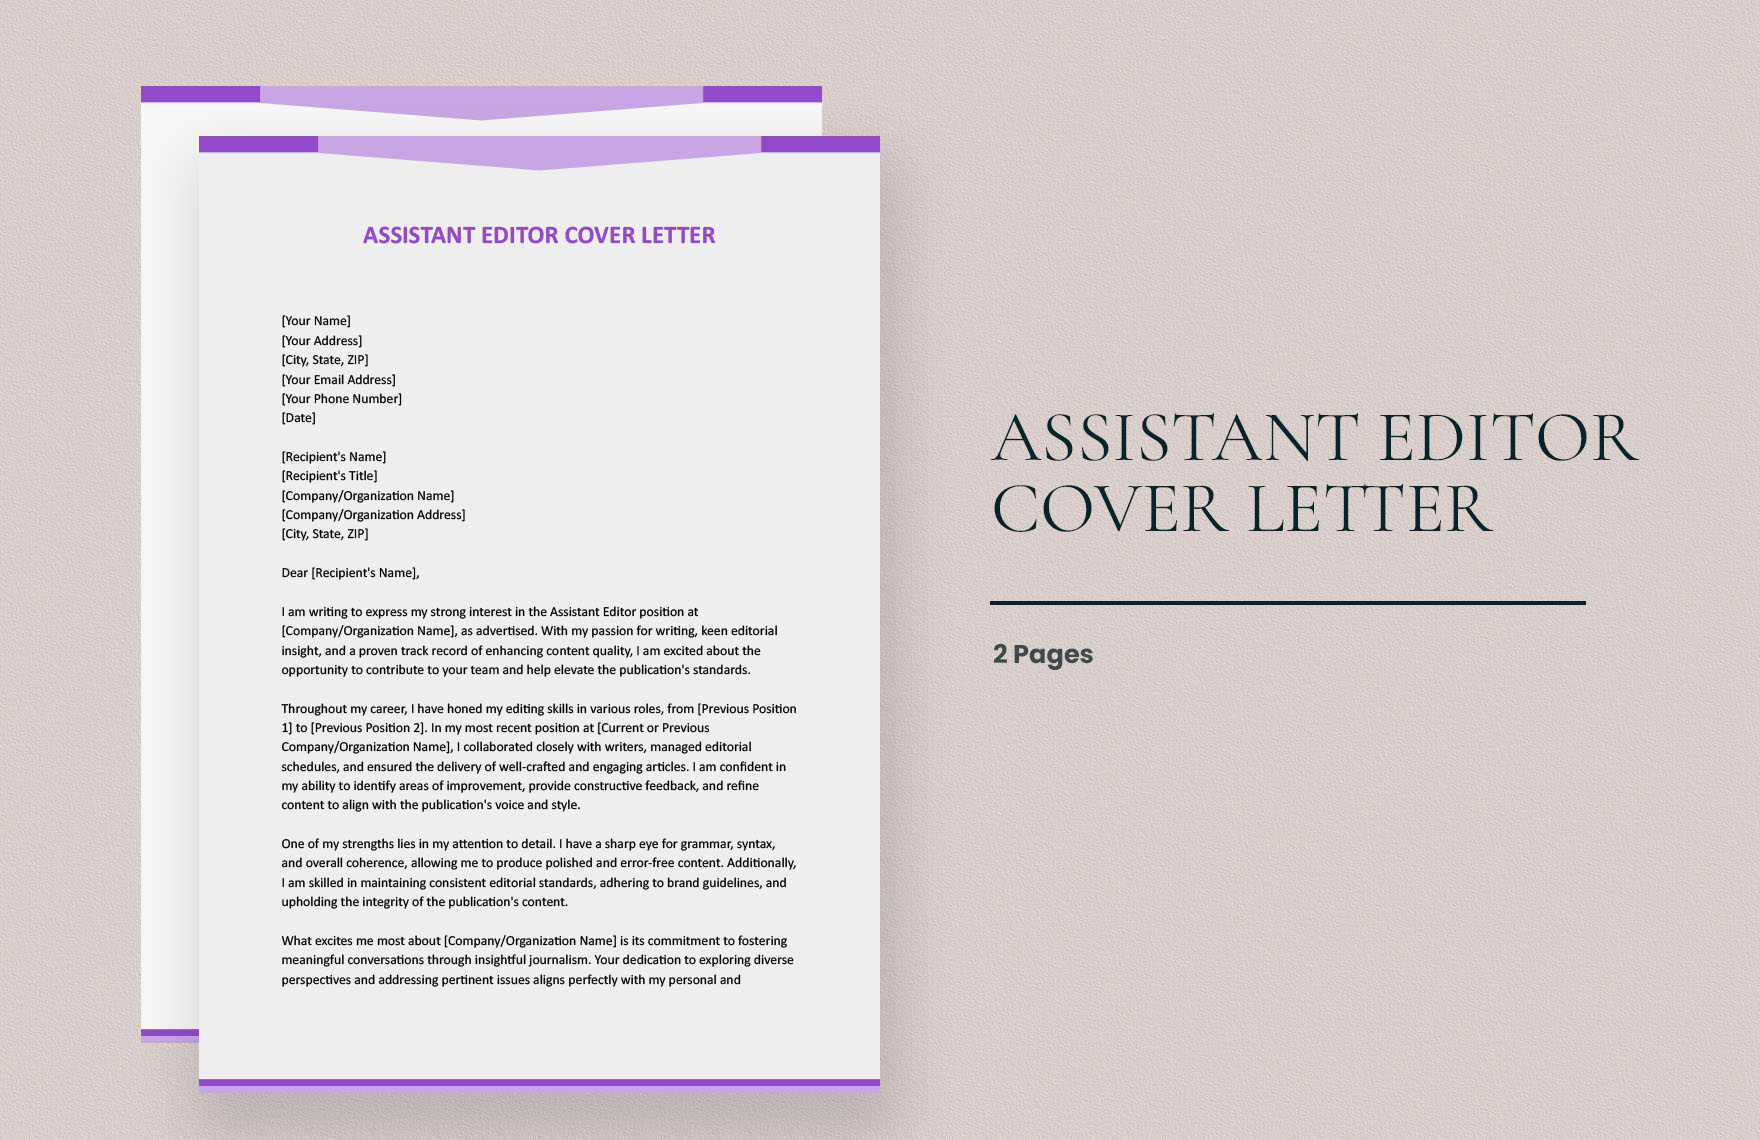 Assistant Editor Cover Letter